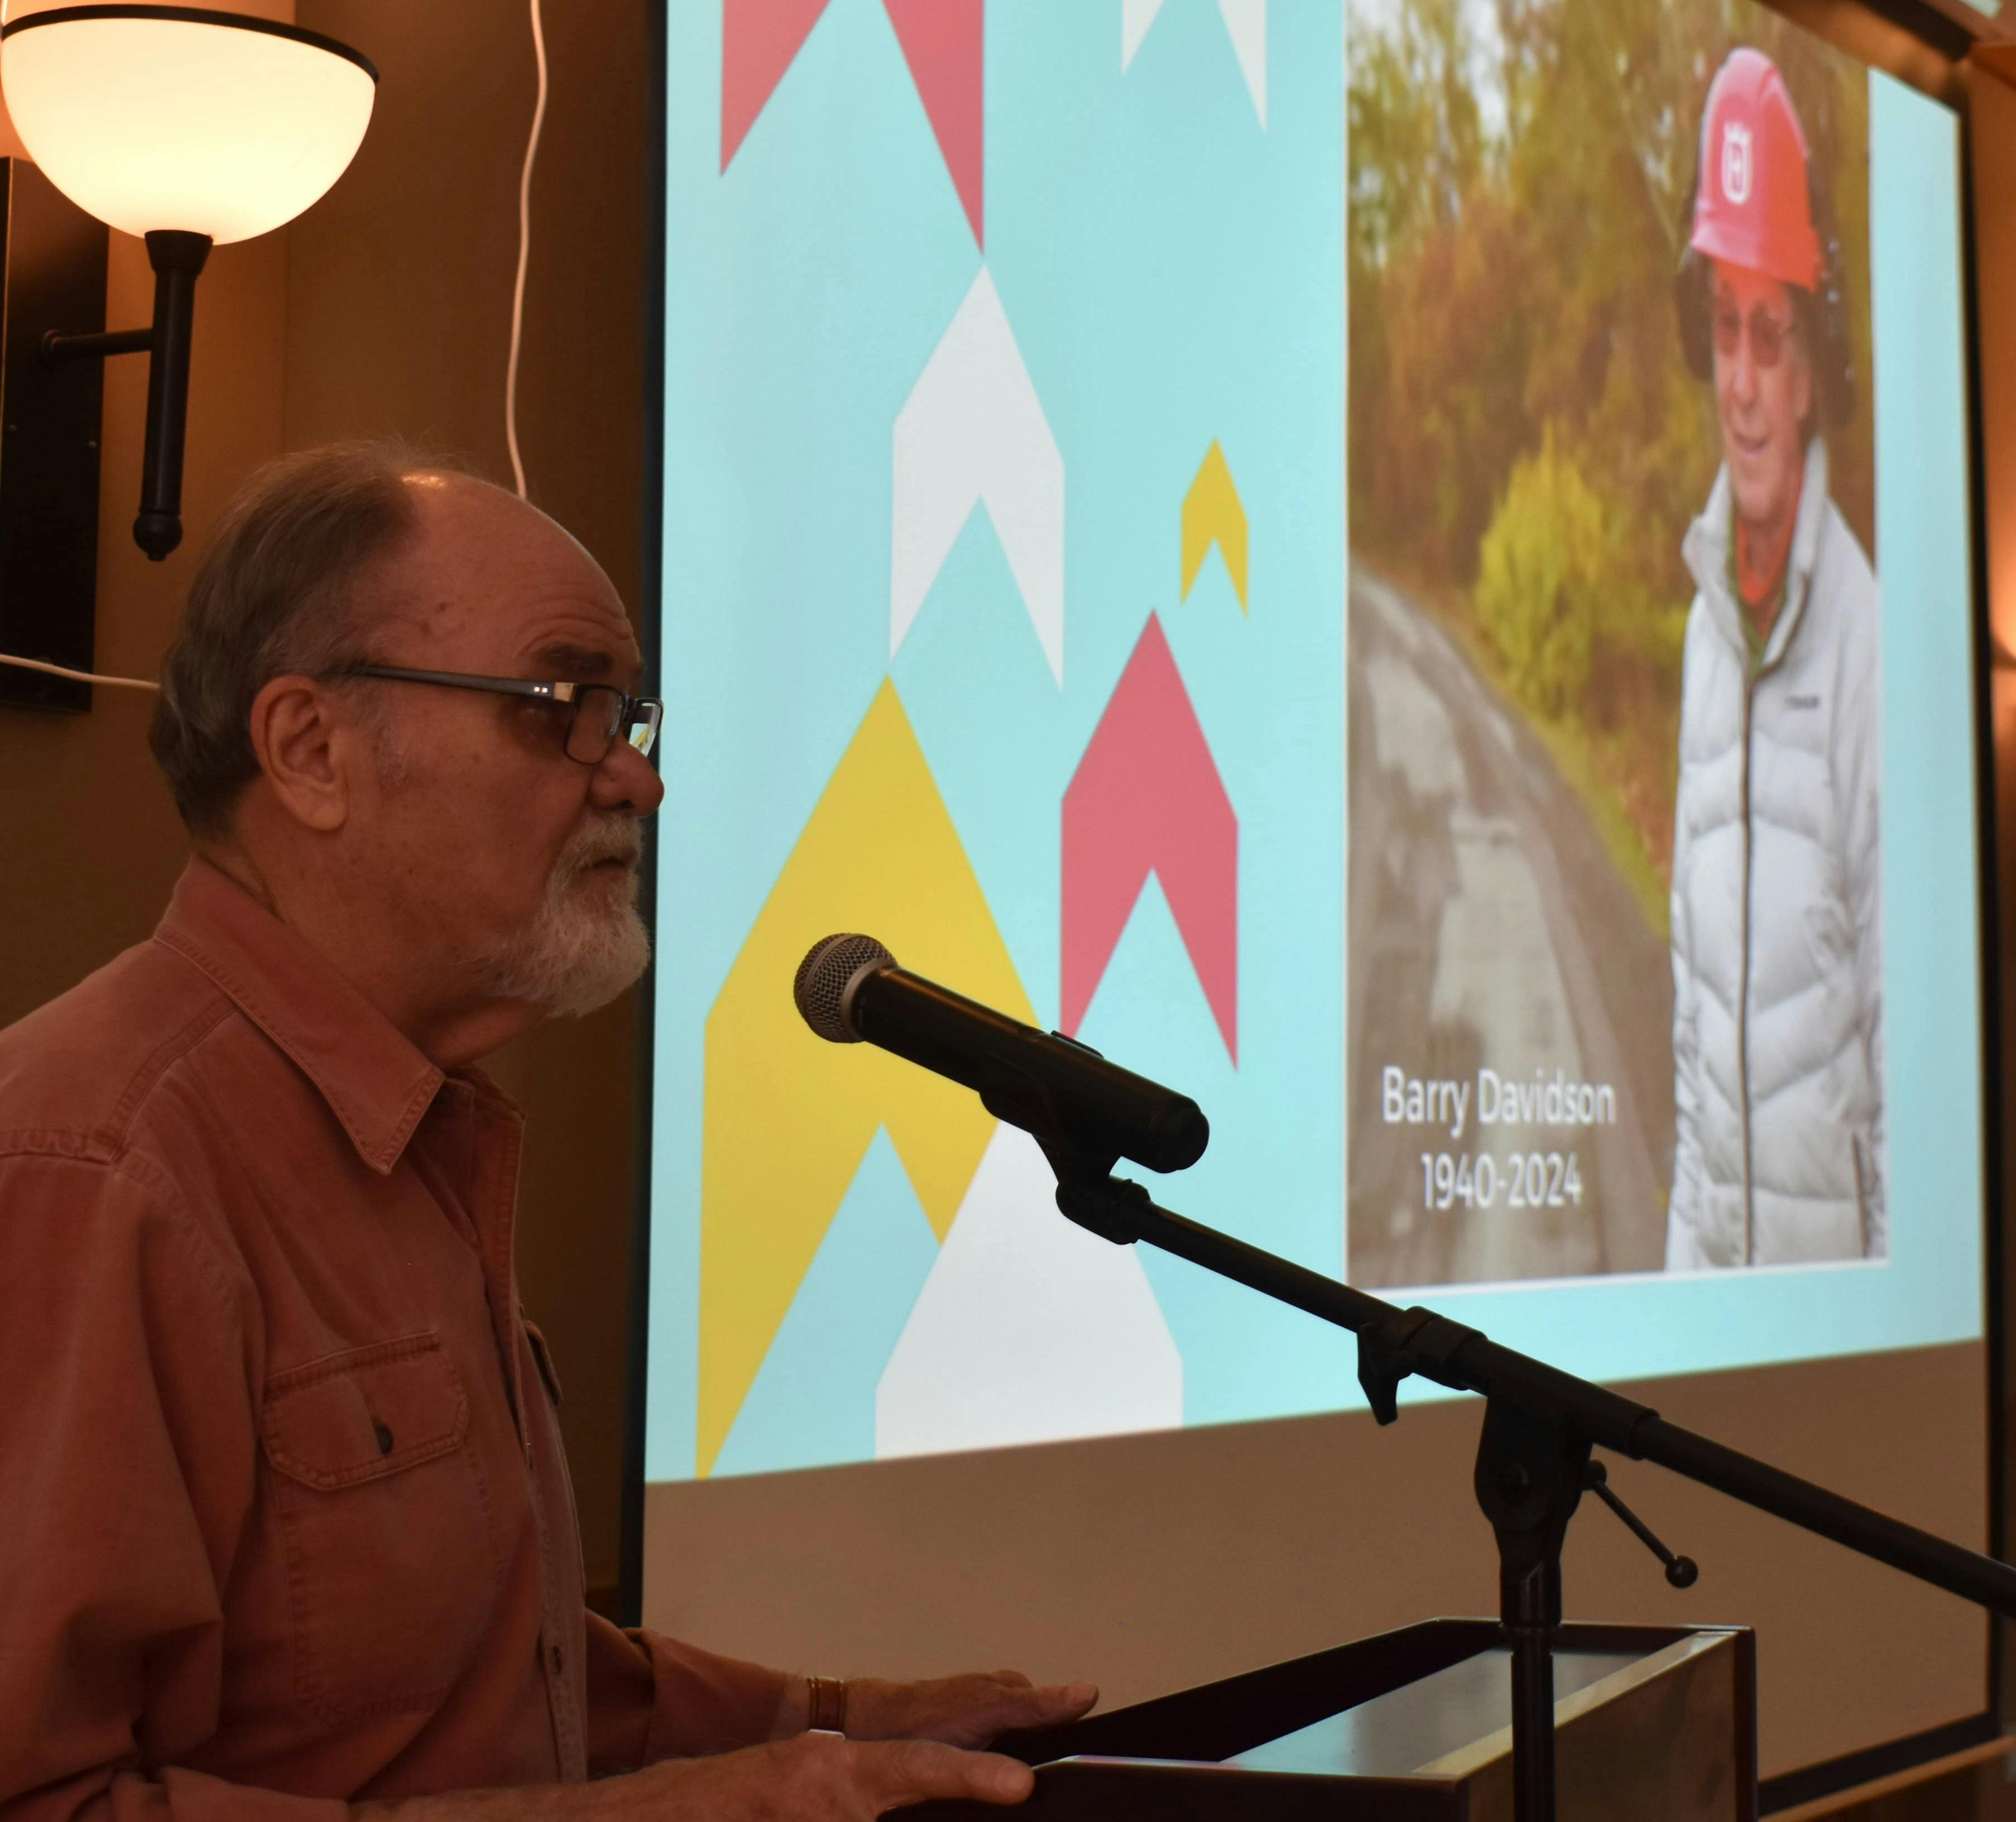 <p>The Legacy of Barry Davidson was honoured at a Millennium Trail celebration event May 2. PEC Trails Committee member Pat Maloney called Mr. Davidson the &#8220;Heart and soul&#8221; of the trail. (Jason Parks/Gazette Staff)</p>
